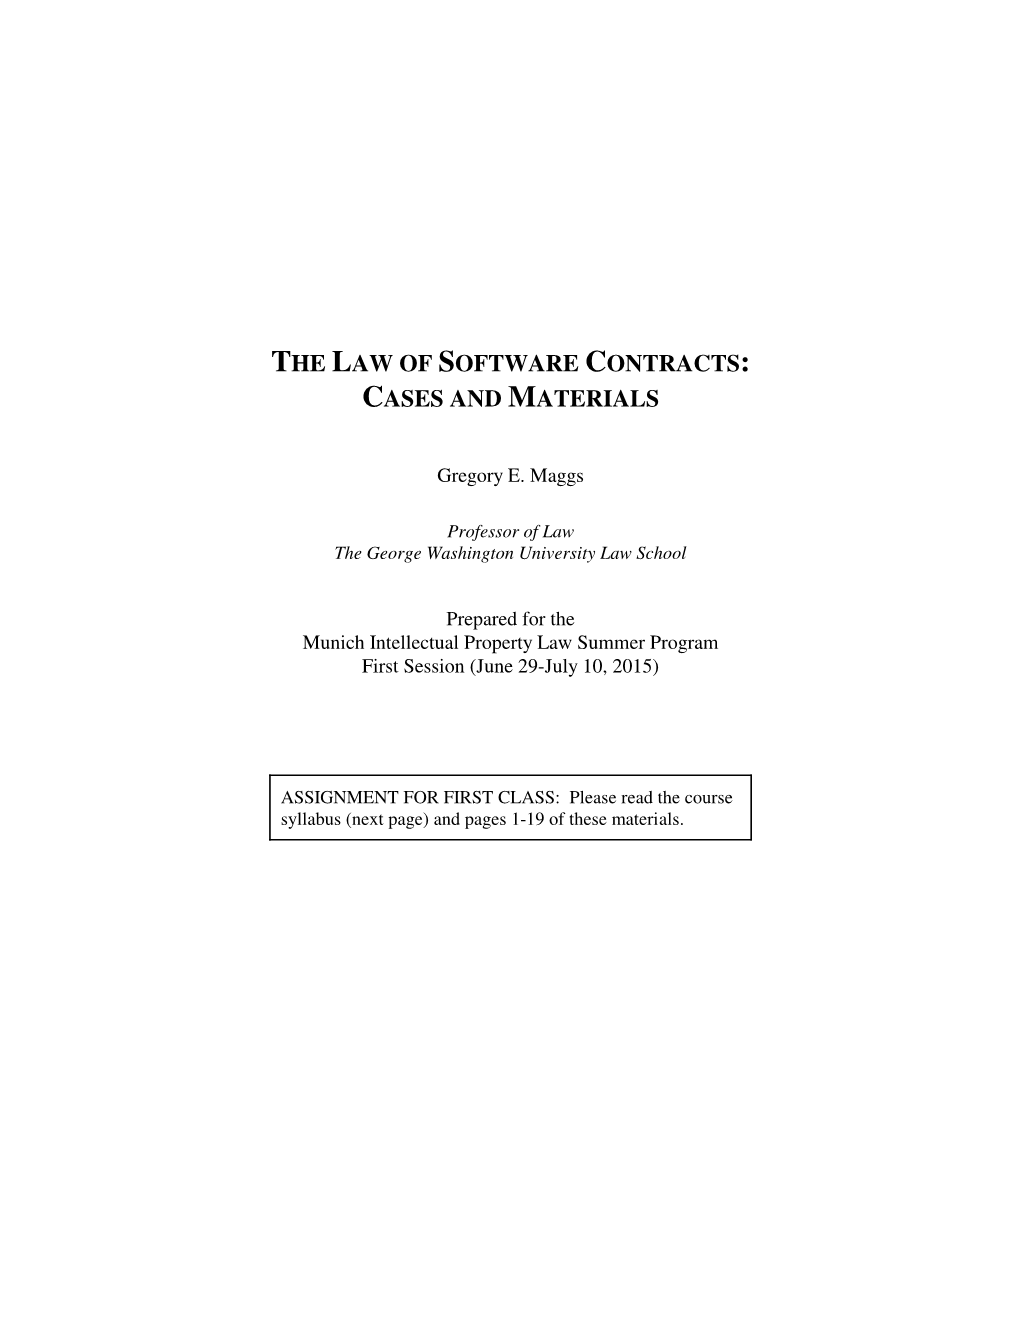 C:\Files\Work Computer\Courses\Munich\Sunmer 2015\Materials\Law-Of-Software-Contracts-Materials-2015-FINAL.Wpd